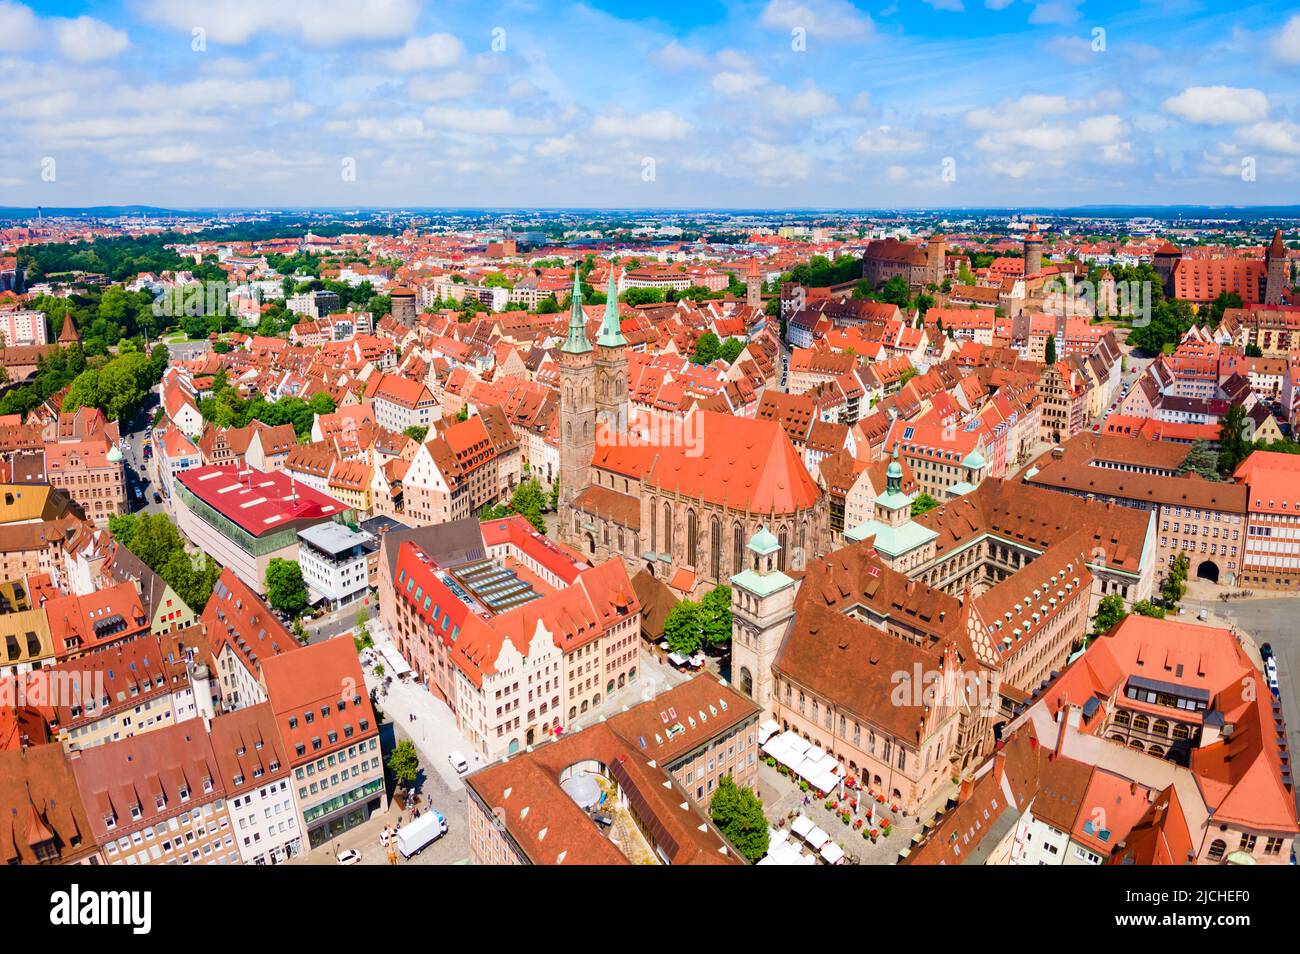 Saint Sebaldus or St. Sebald Church aerial panoramic view in Nuremberg old town. Nuremberg is the second largest city of Bavaria state in Germany. Stock Photo